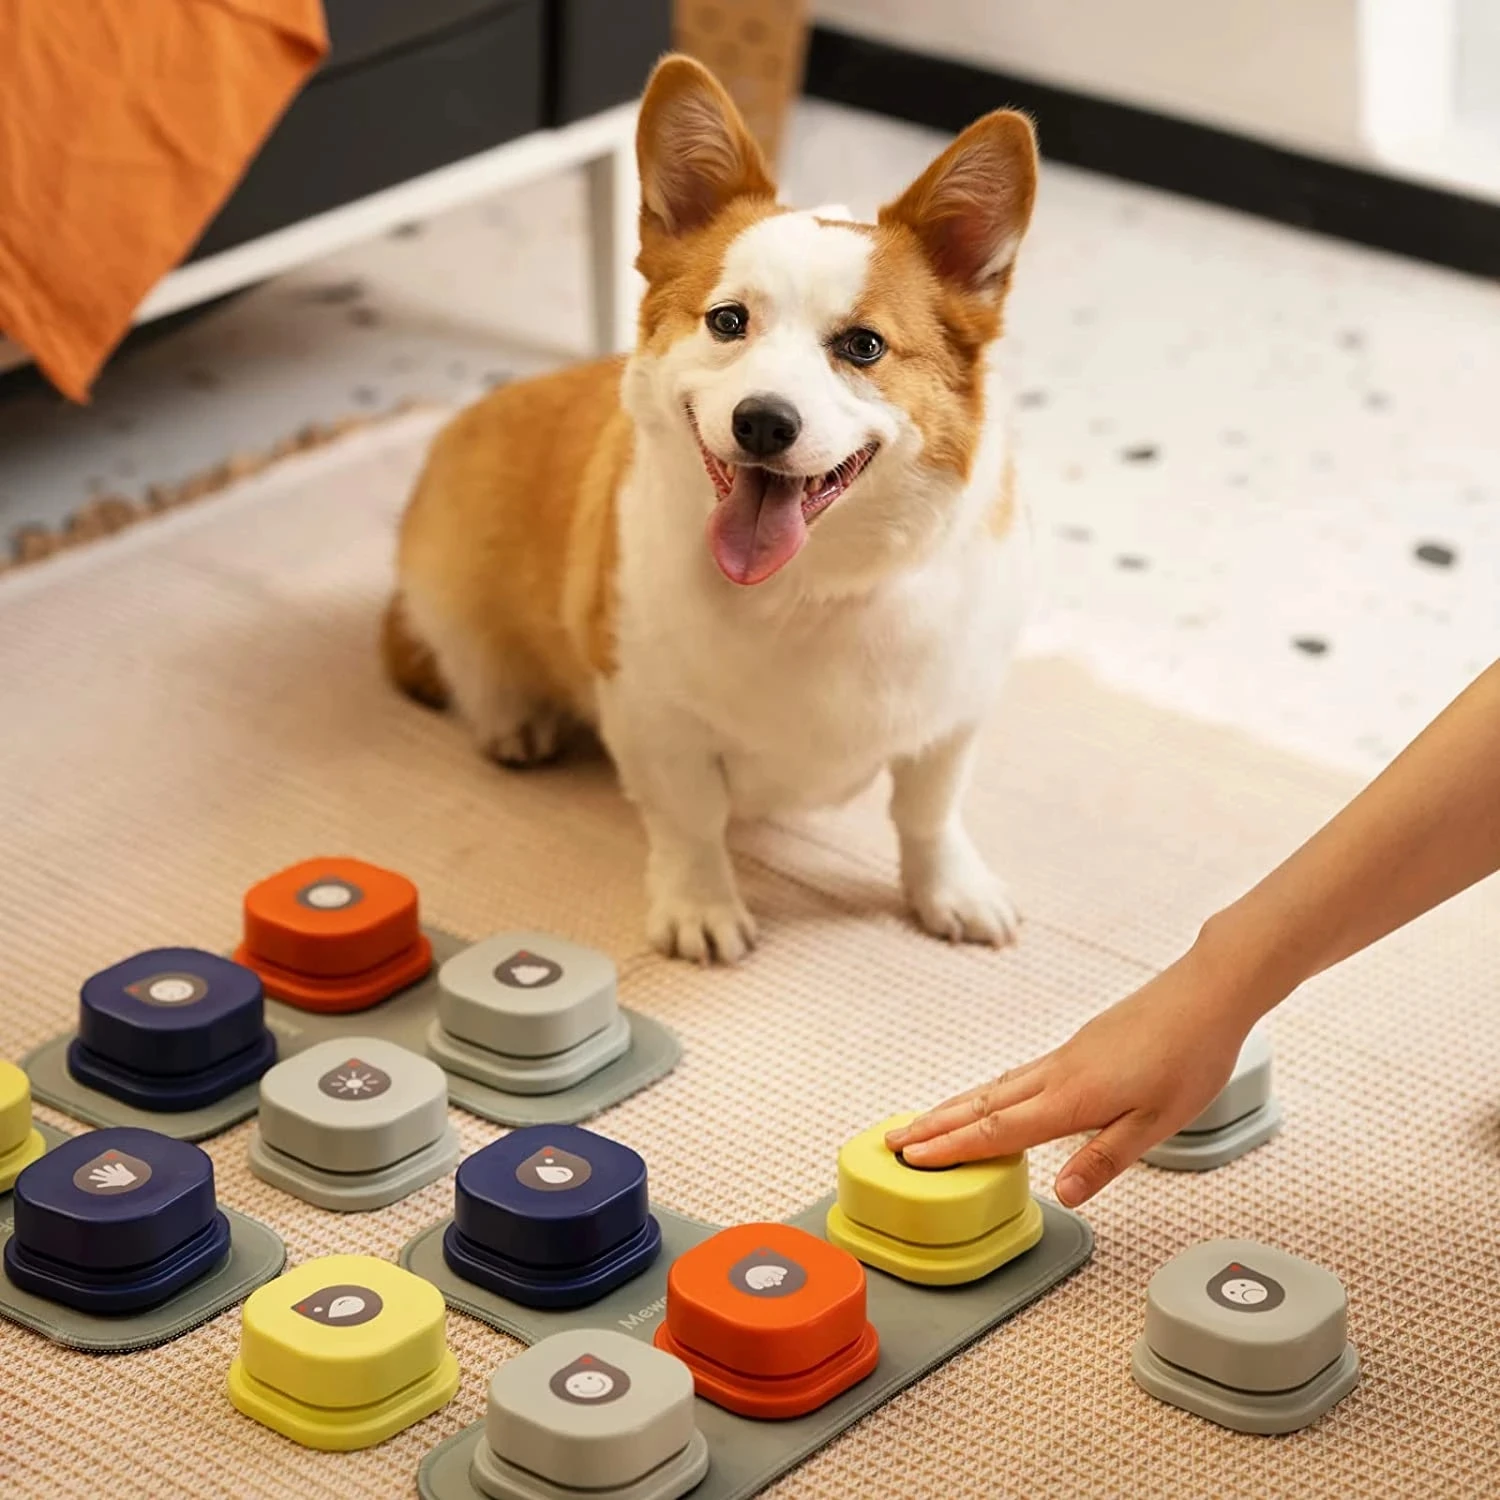 

New Dog Button Record Talking Pet Communication Vocal Training Interactive Toy Bell Ringer With Pad And Sticker Easy To Use